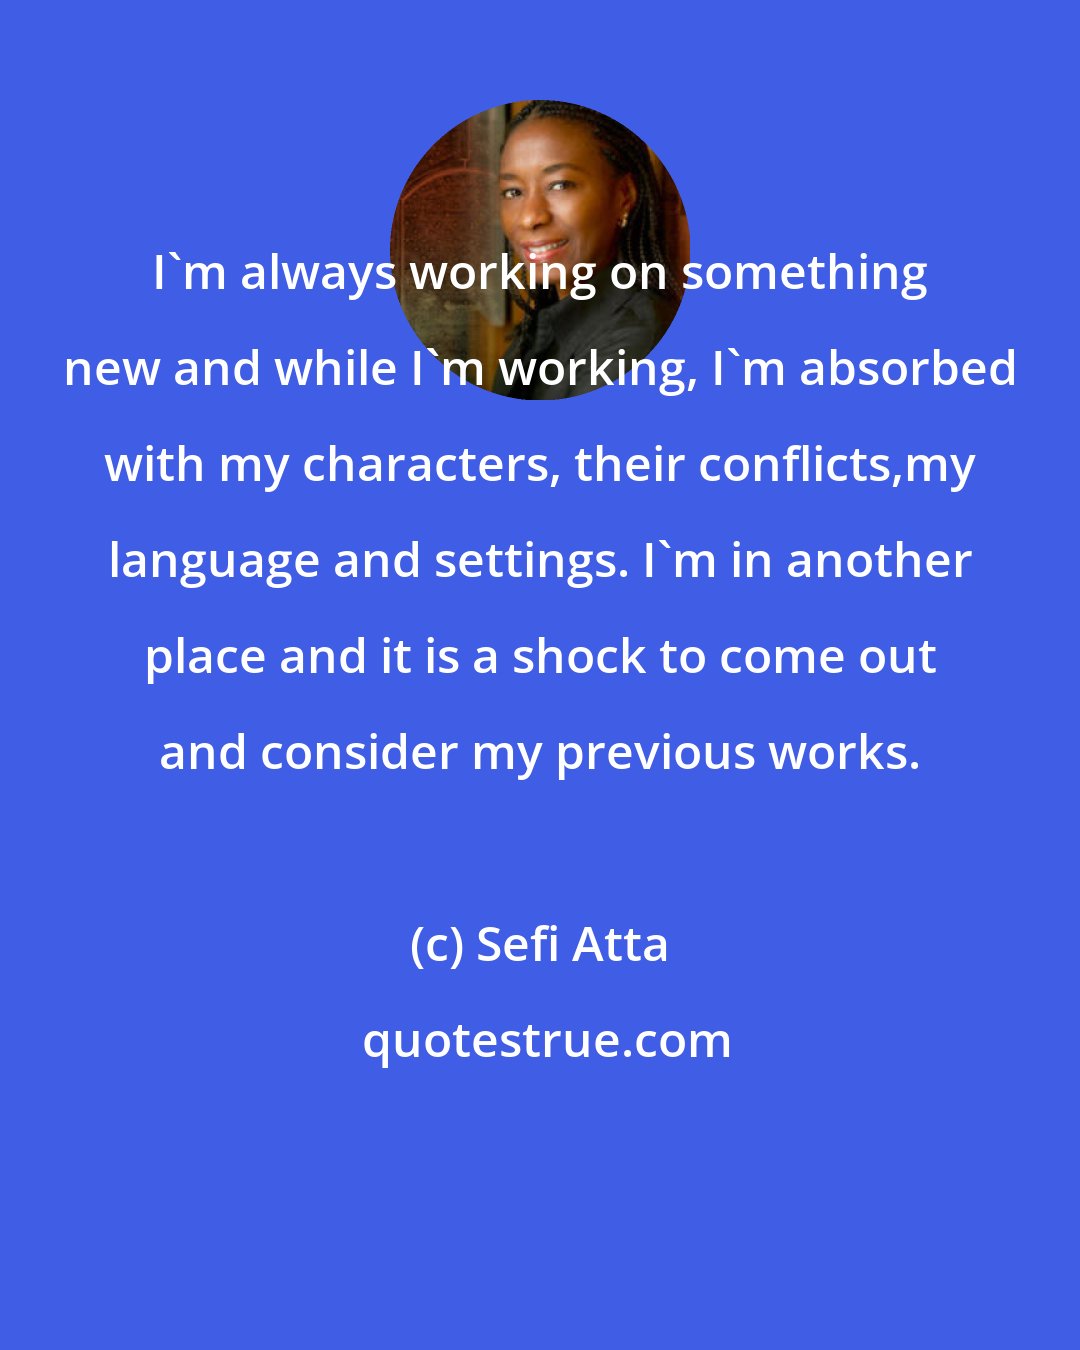 Sefi Atta: I'm always working on something new and while I'm working, I'm absorbed with my characters, their conflicts,my language and settings. I'm in another place and it is a shock to come out and consider my previous works.